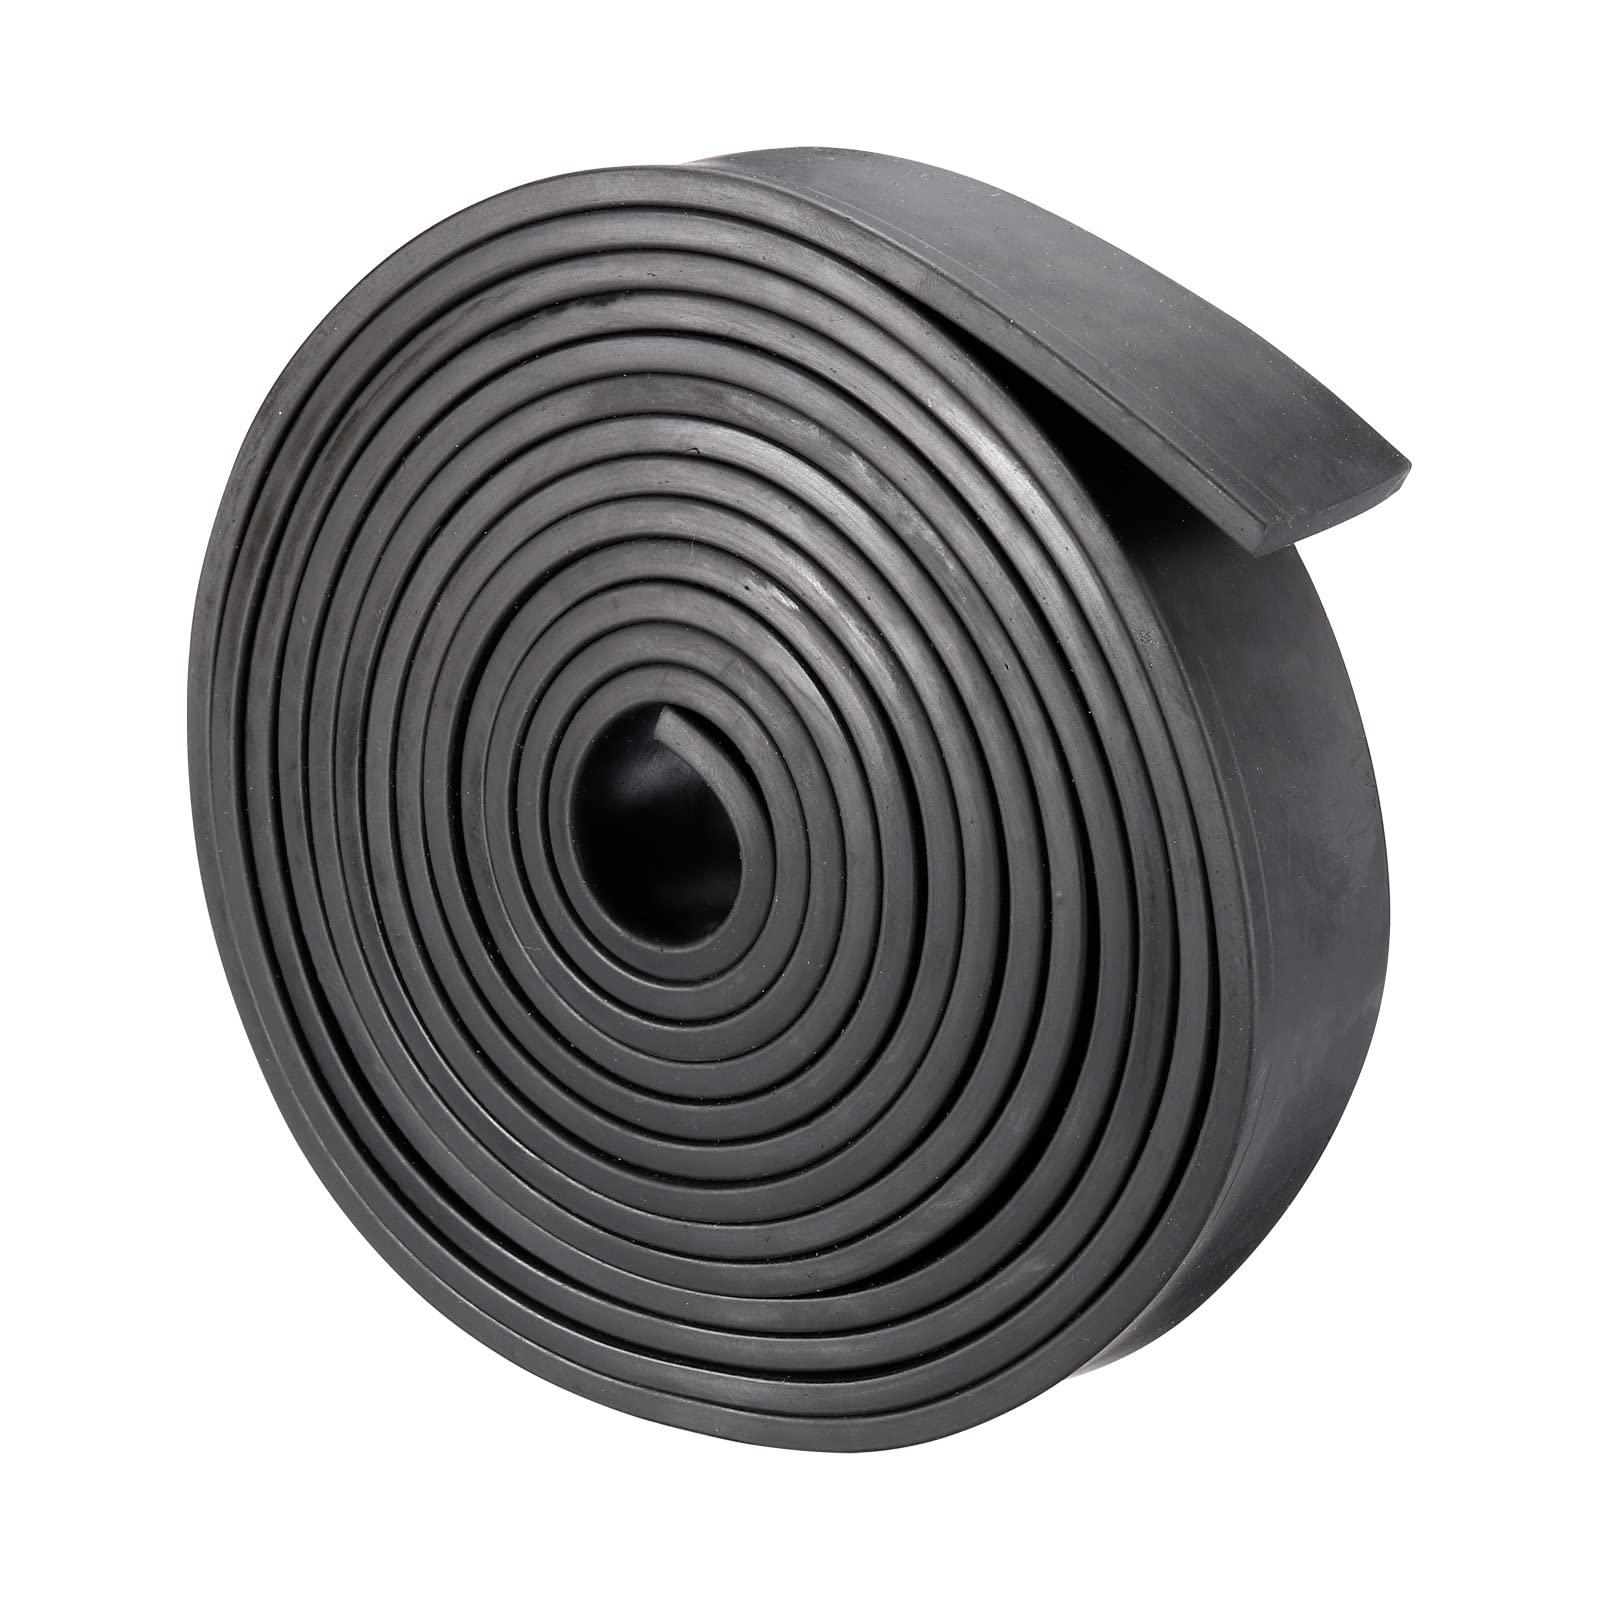 sourcing map Neoprene Rubber Sheet Rolls 5mm(T) x30mm(W) x2m(L), Solid Rubber Strips for DIY Gasket, Sealing Padding, Reduce Vibration Mat 0